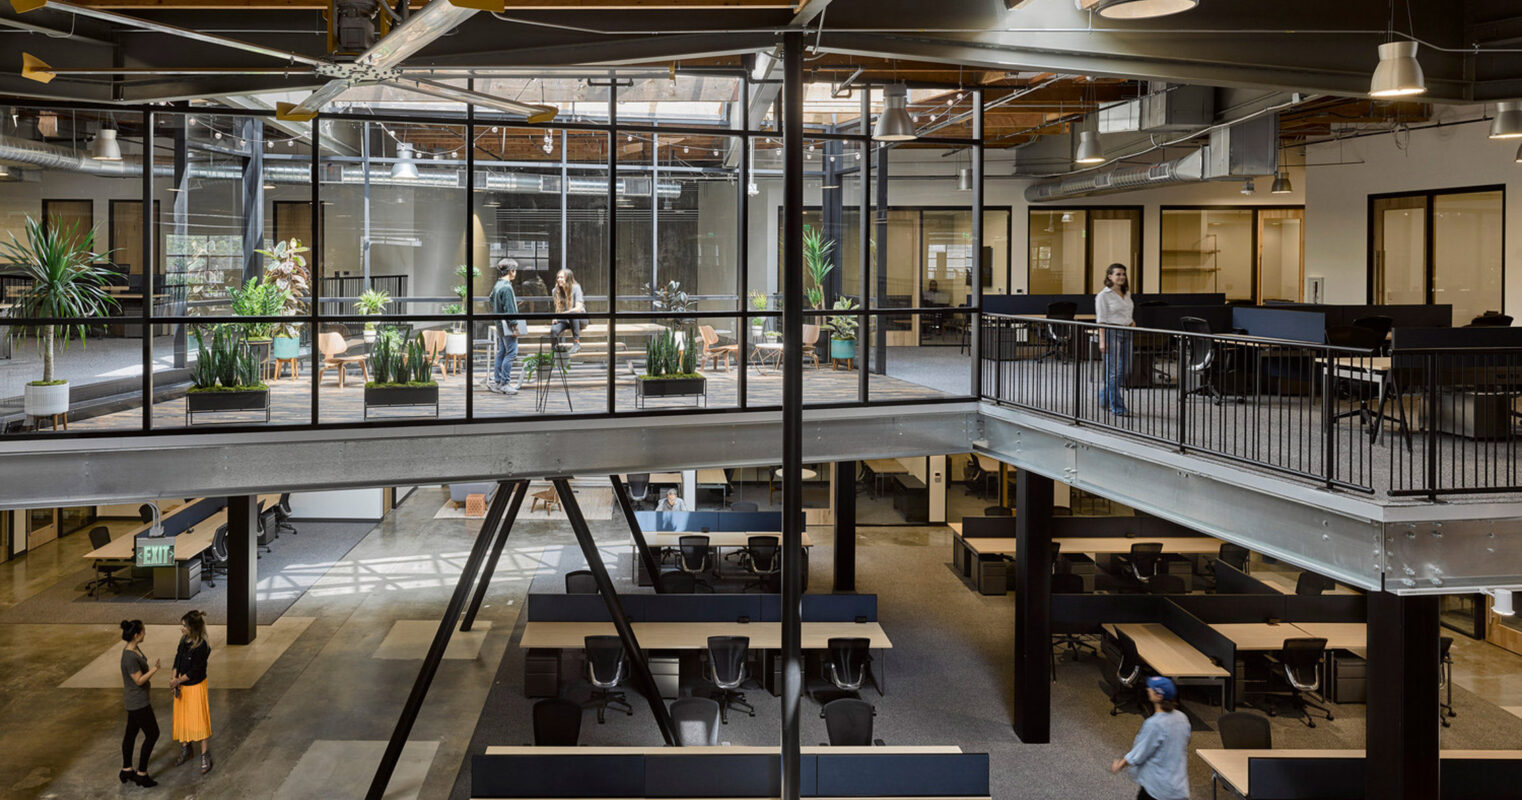 Open-plan office space featuring exposed beams and HVAC ductwork, with wood-toned desks, black ergonomic chairs, and pendant lighting. Glass-walled meeting rooms and abundant greenery add to the modern, functional design promoting collaboration and airflow.